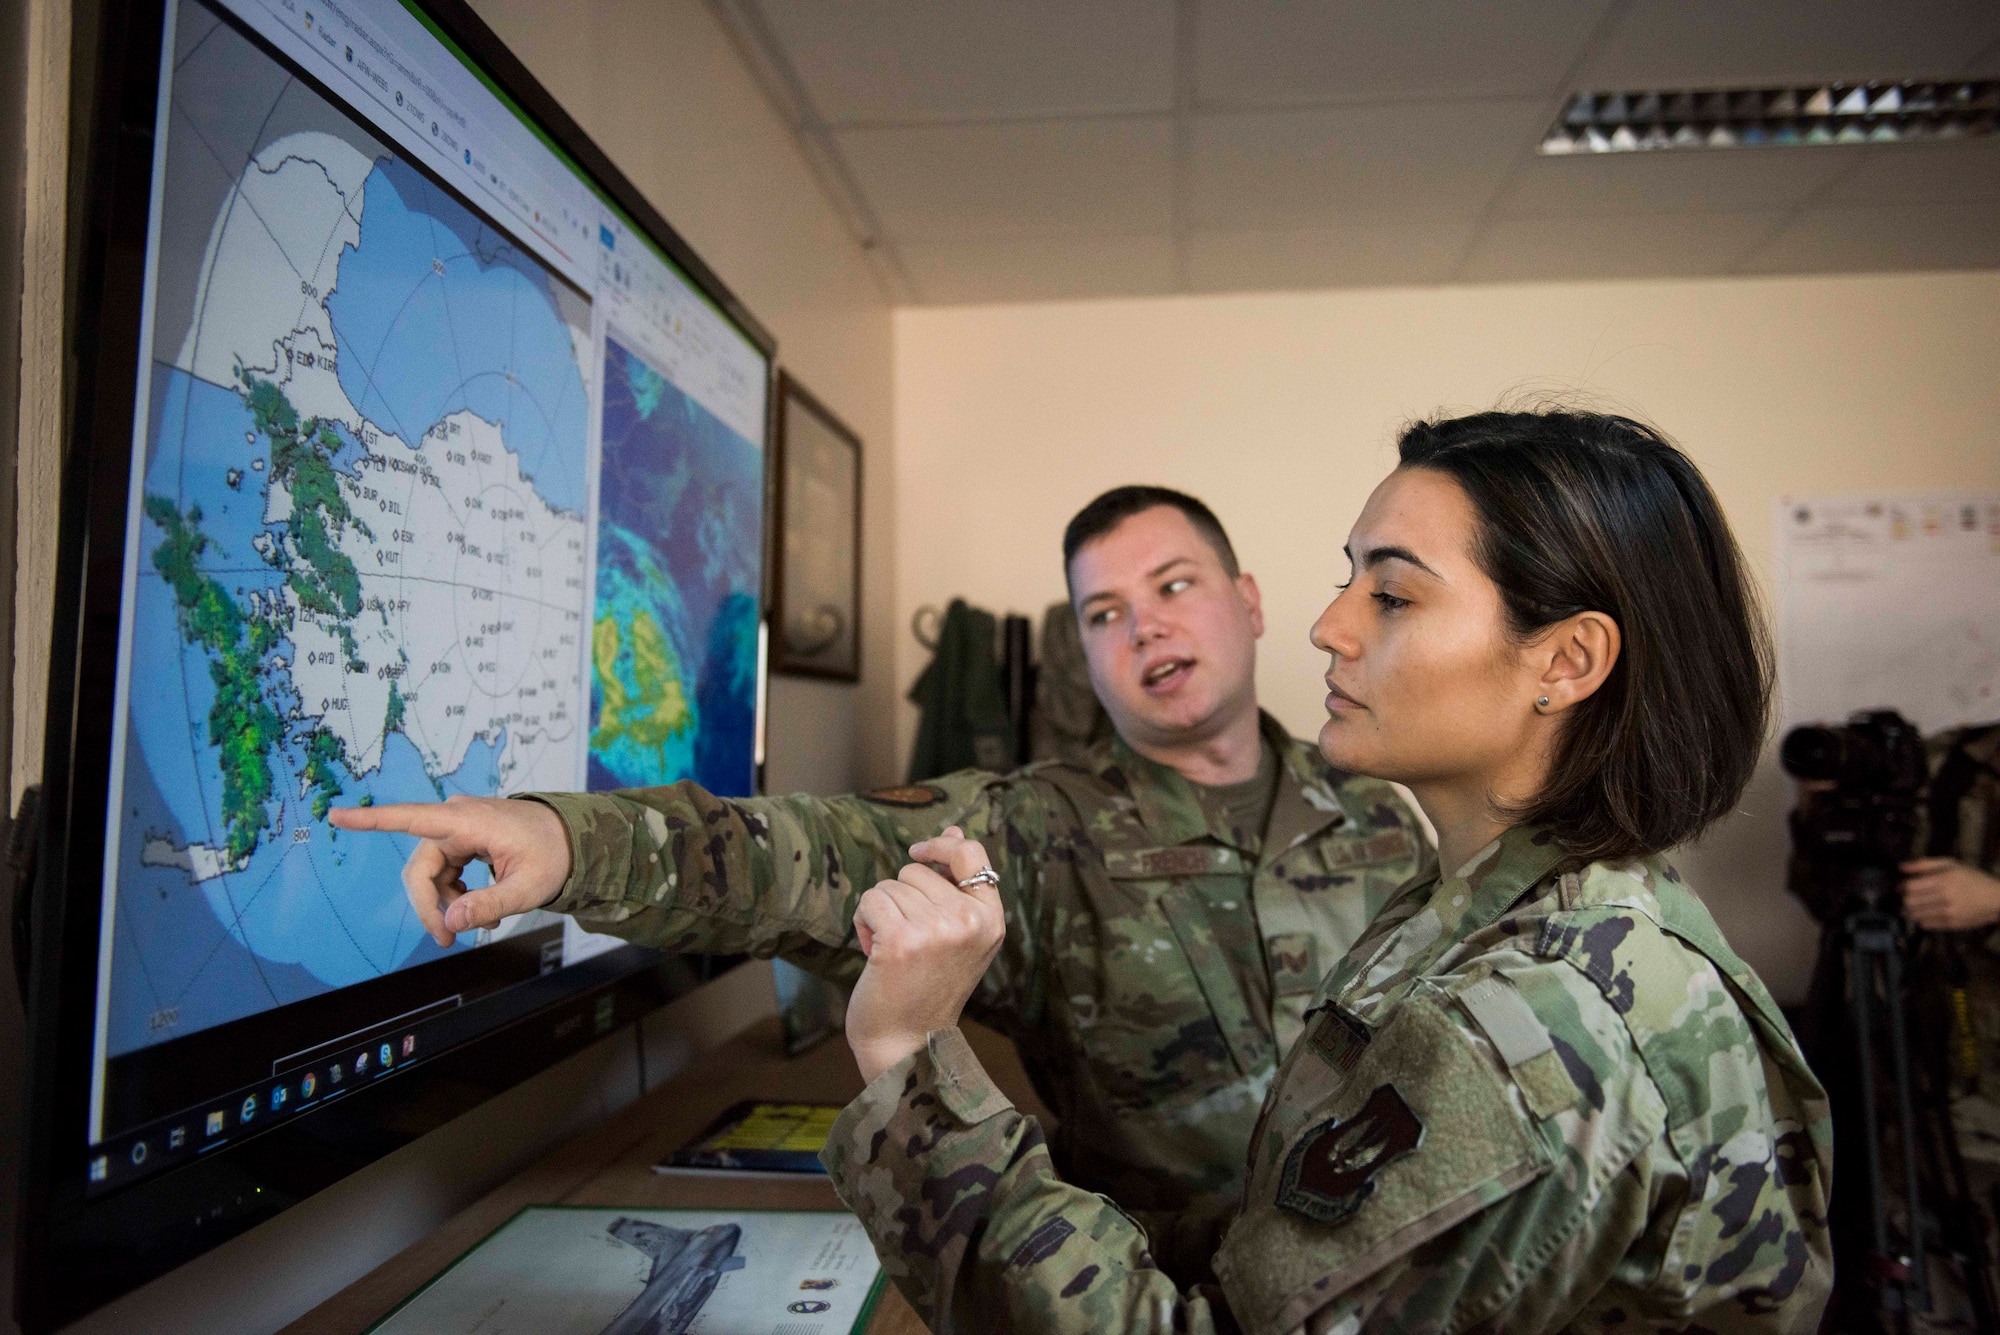 U.S. Air Force Staff Sgt. Sean French, 39th Operations Support Squadron weather forecaster, discusses weather activity with U.S. Air Force Capt. Jackie Kell, 39th OSS intelligence flight commander, Nov. 25, 2019, at Incirlik Air Base, Turkey. Critical to a successful operation, weather and intelligence constitute a major component of military planning. (U.S. Air Force photo by Staff Sgt. Joshua Magbanua)